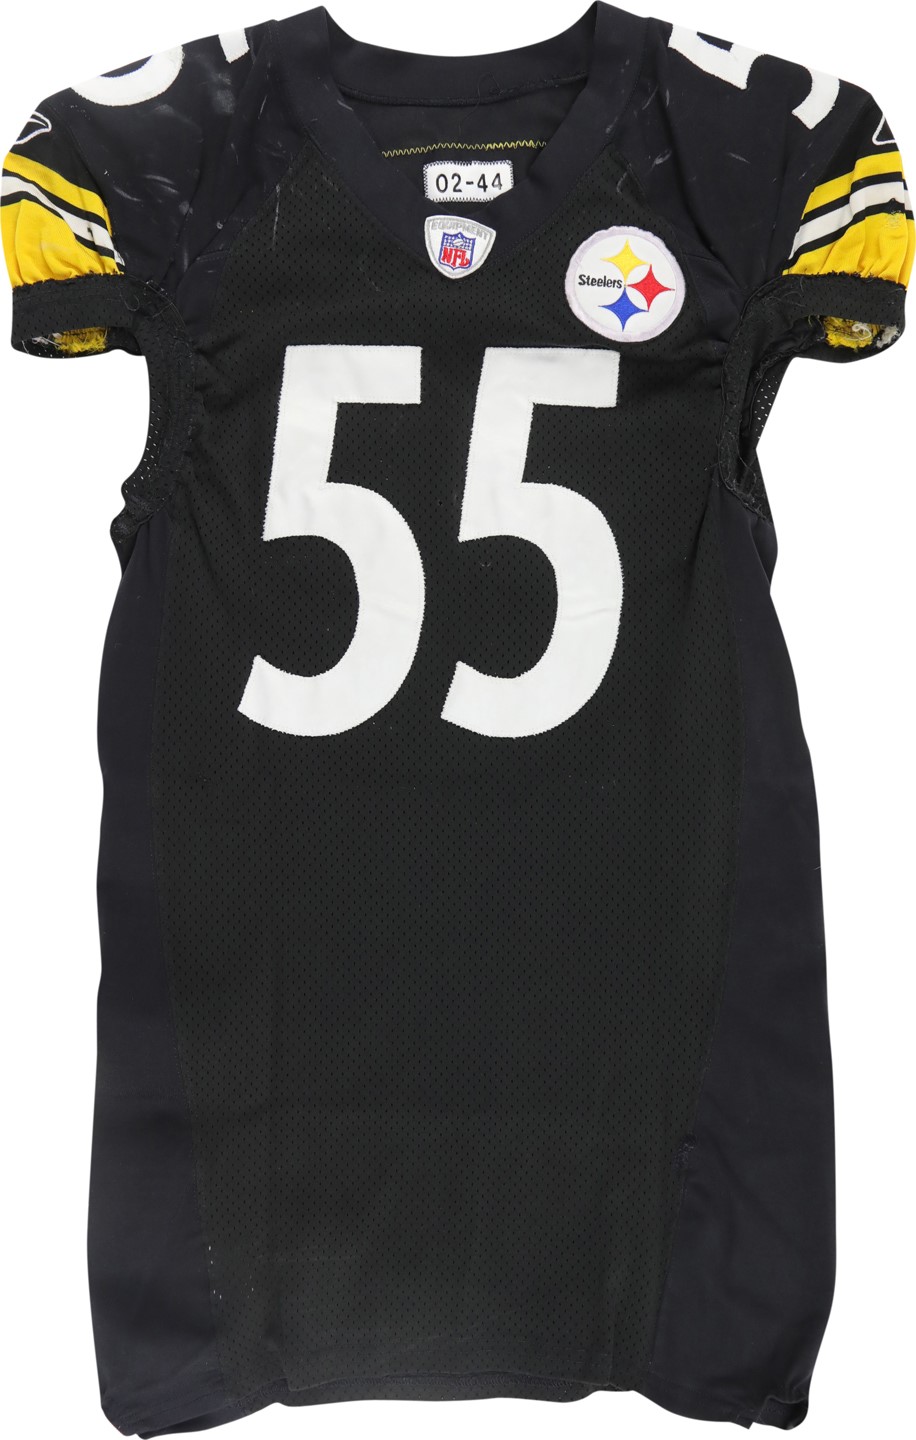 The Pittsburgh Steelers Game Worn Jersey Archive - 2002 Joey Porter Pittsburgh Steelers Game Worn Jersey from Interception and Sack Games! (Photo-Matched to Six Games)